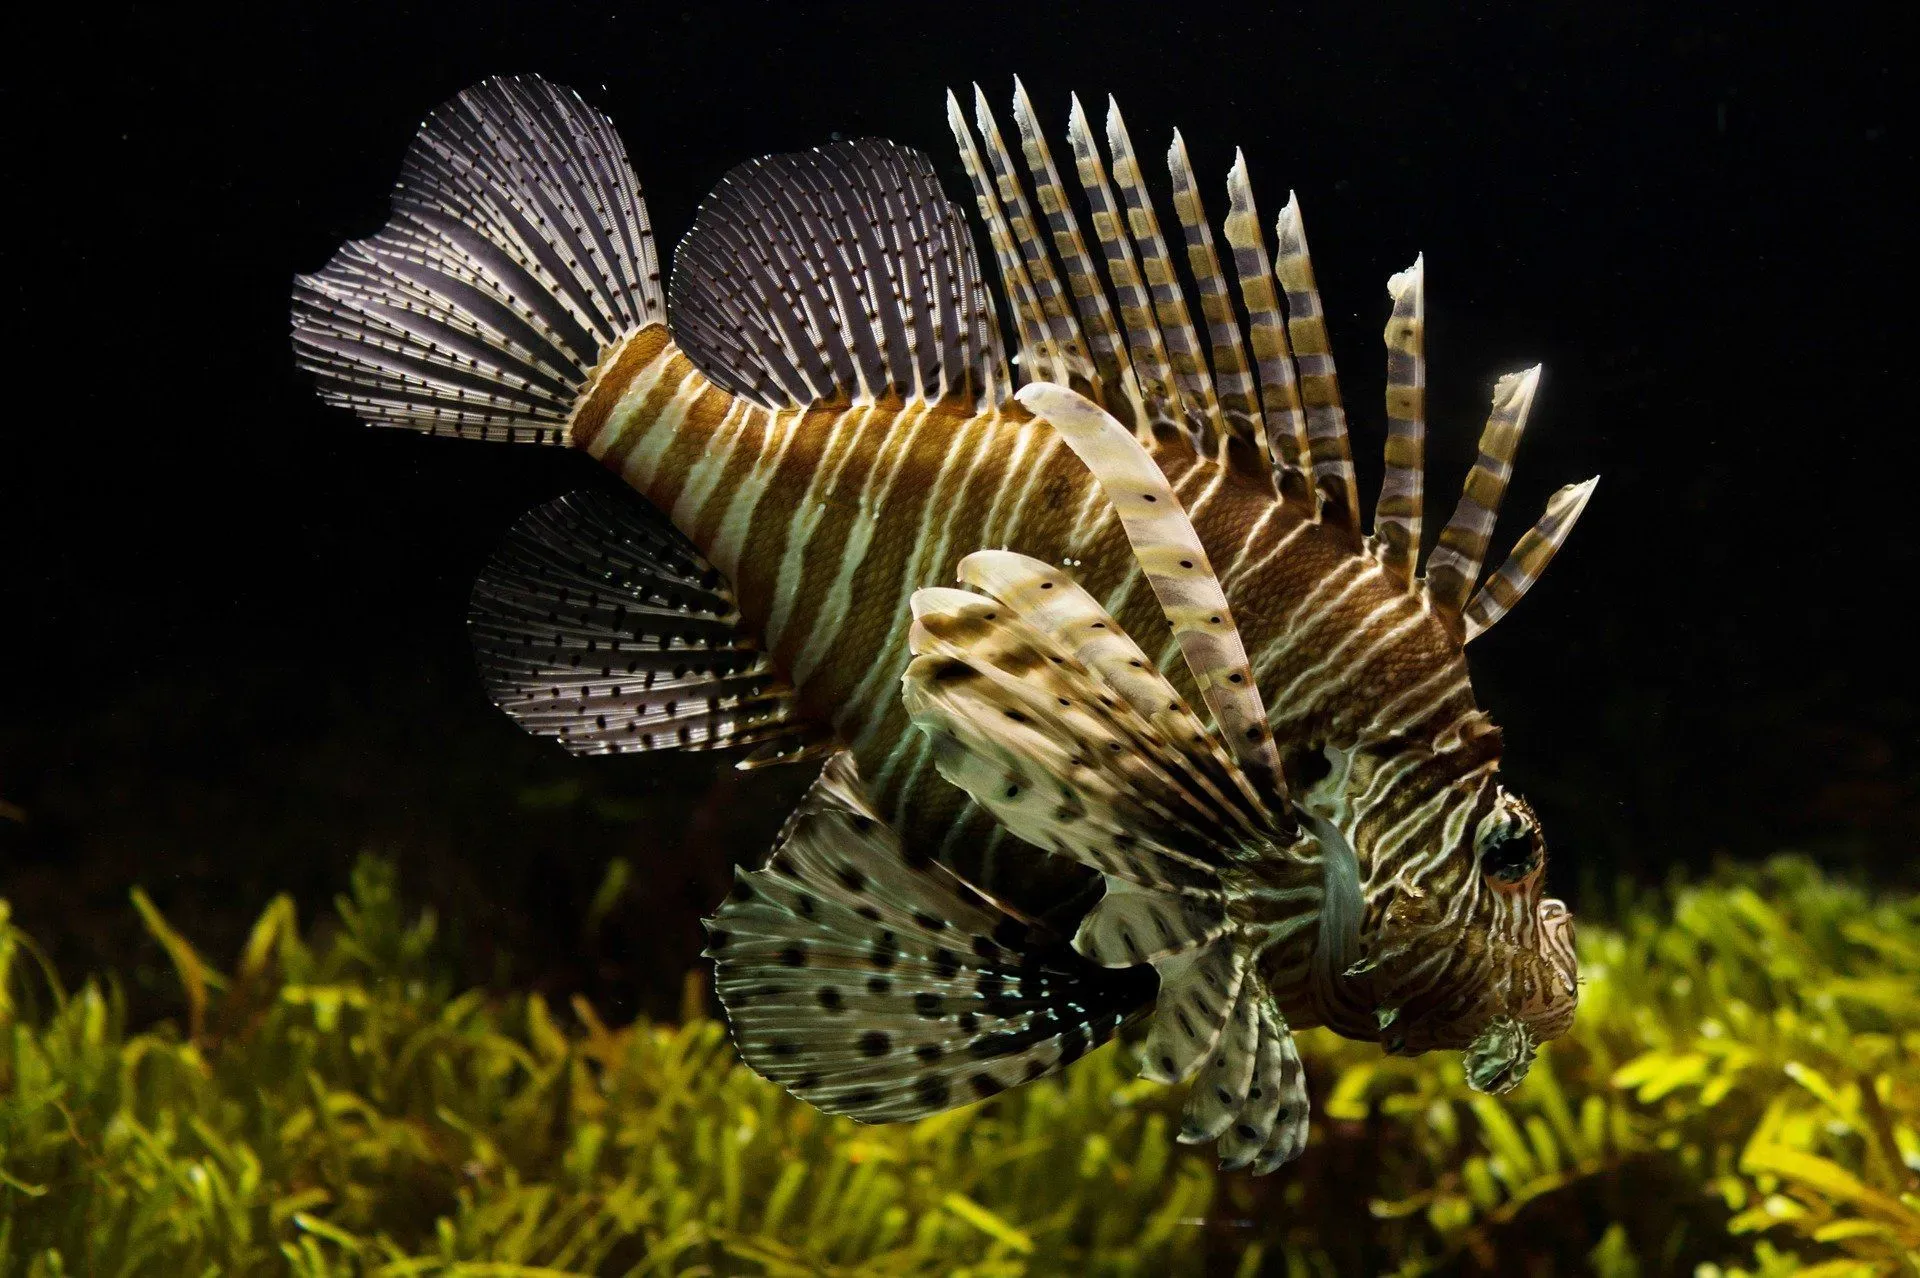 Clown pleco size, lifespan, and diet are extremely important considerations for the owners.